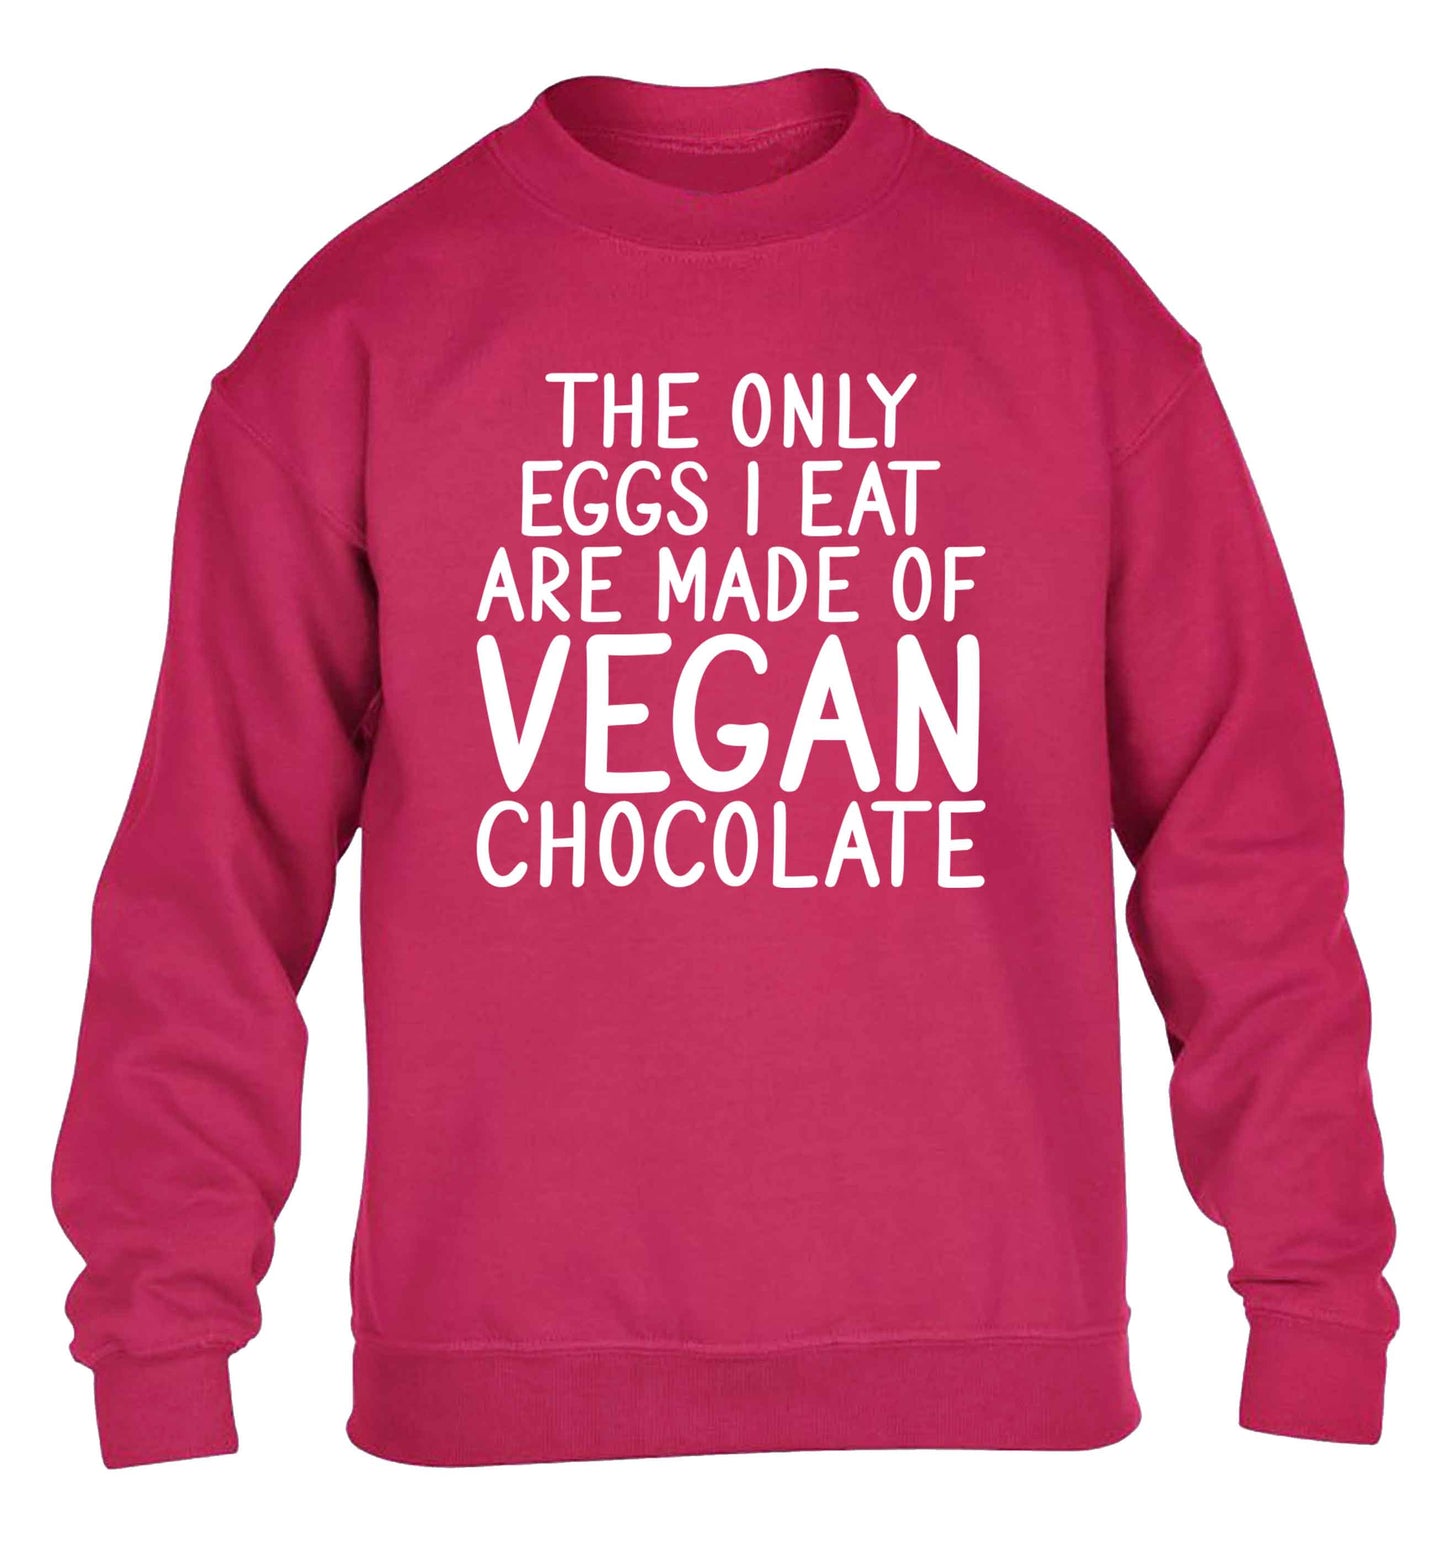 The only eggs I eat are made of vegan chocolate children's pink sweater 12-13 Years